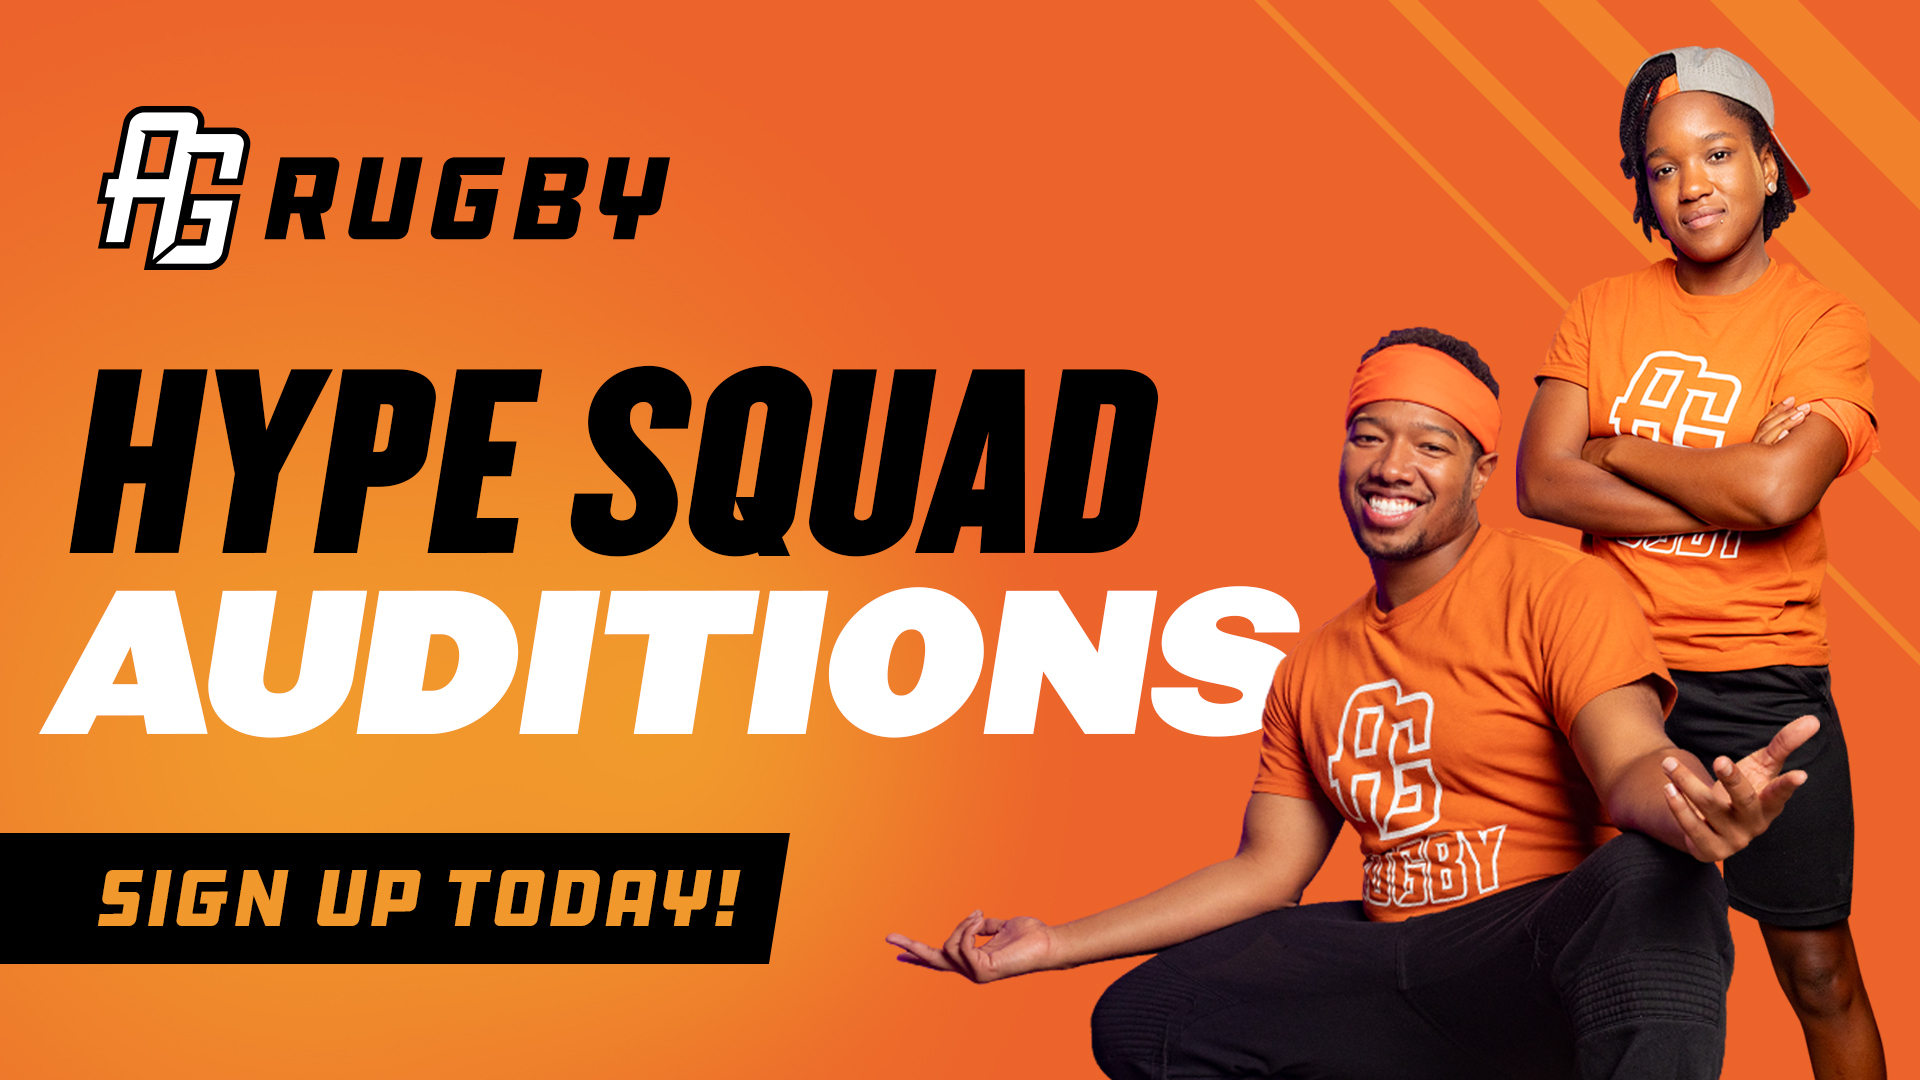 Join The AG Hype Squad | Auditions November 6th!